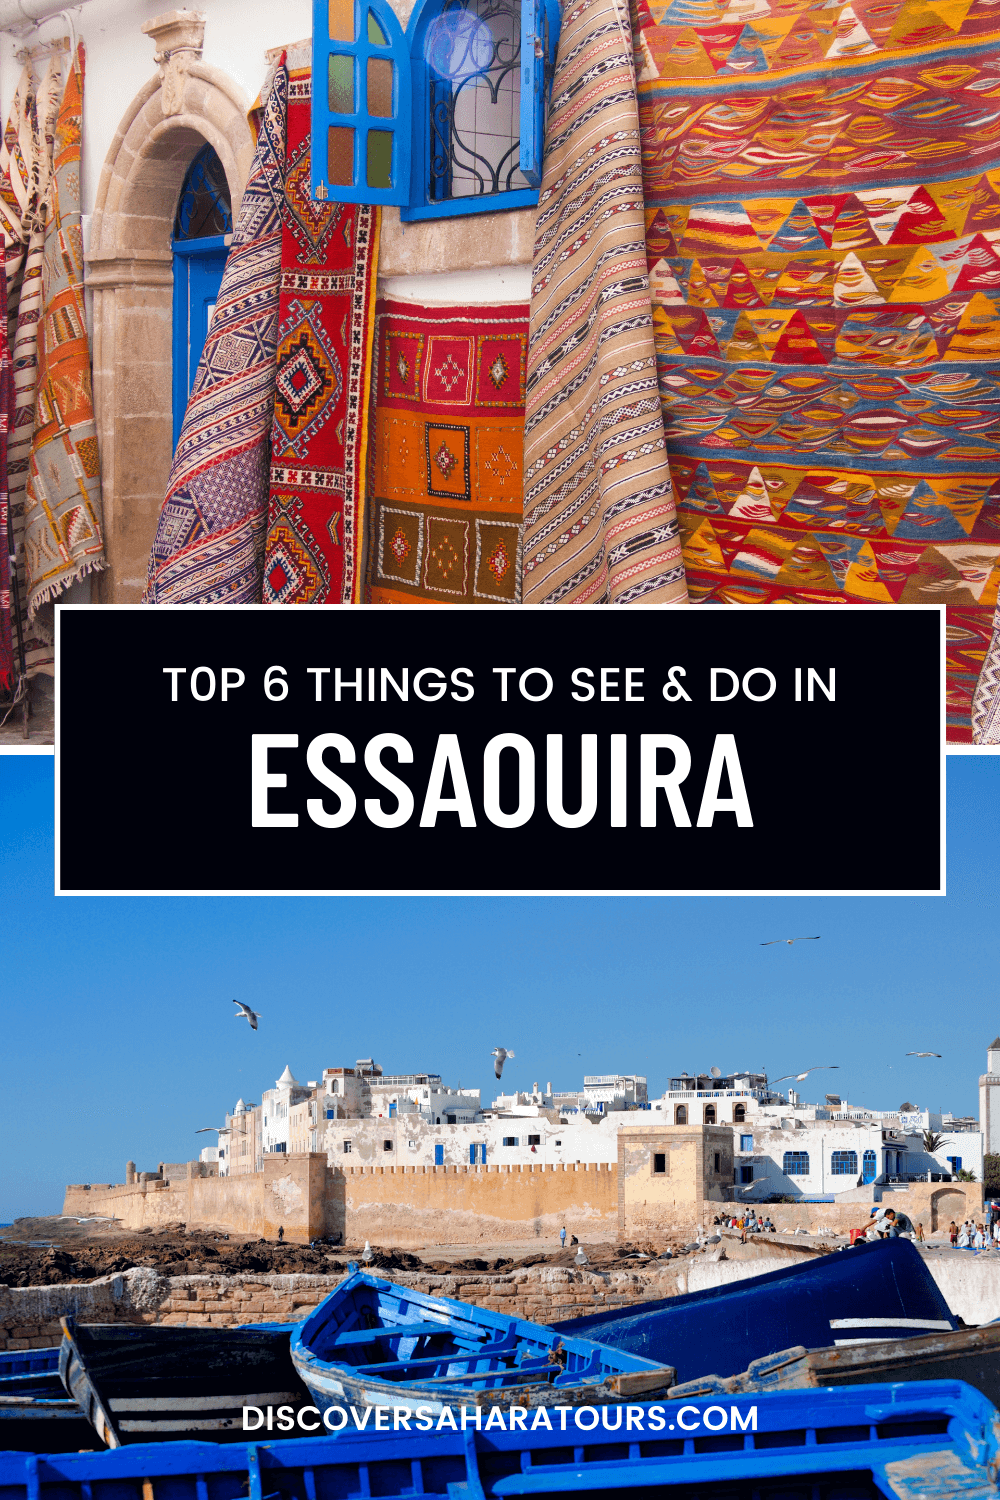 Featured image for “6 Top Things to See & Do in Essaouira”